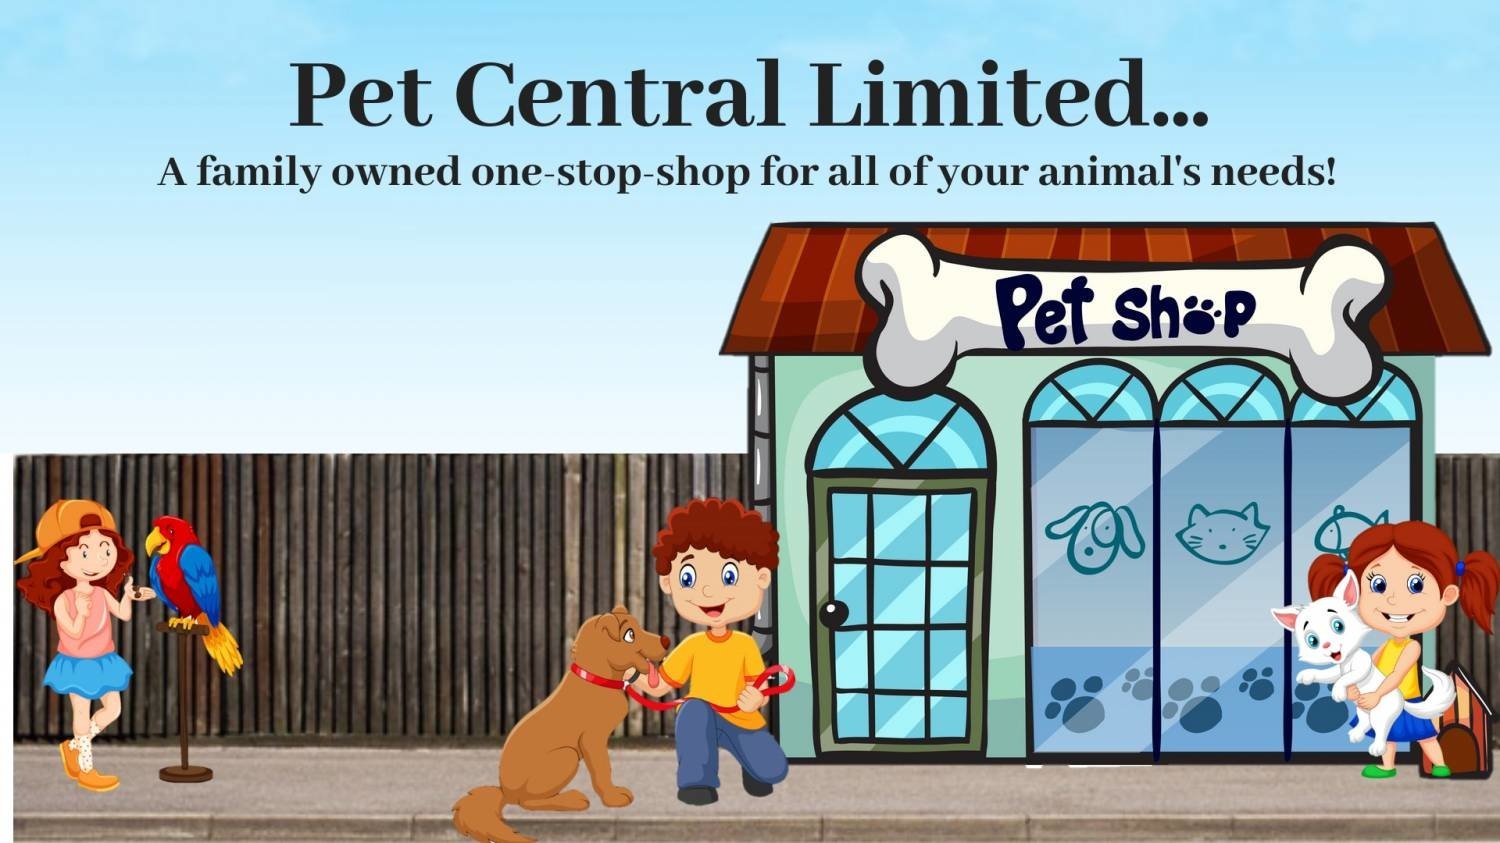 Pet Central Limited